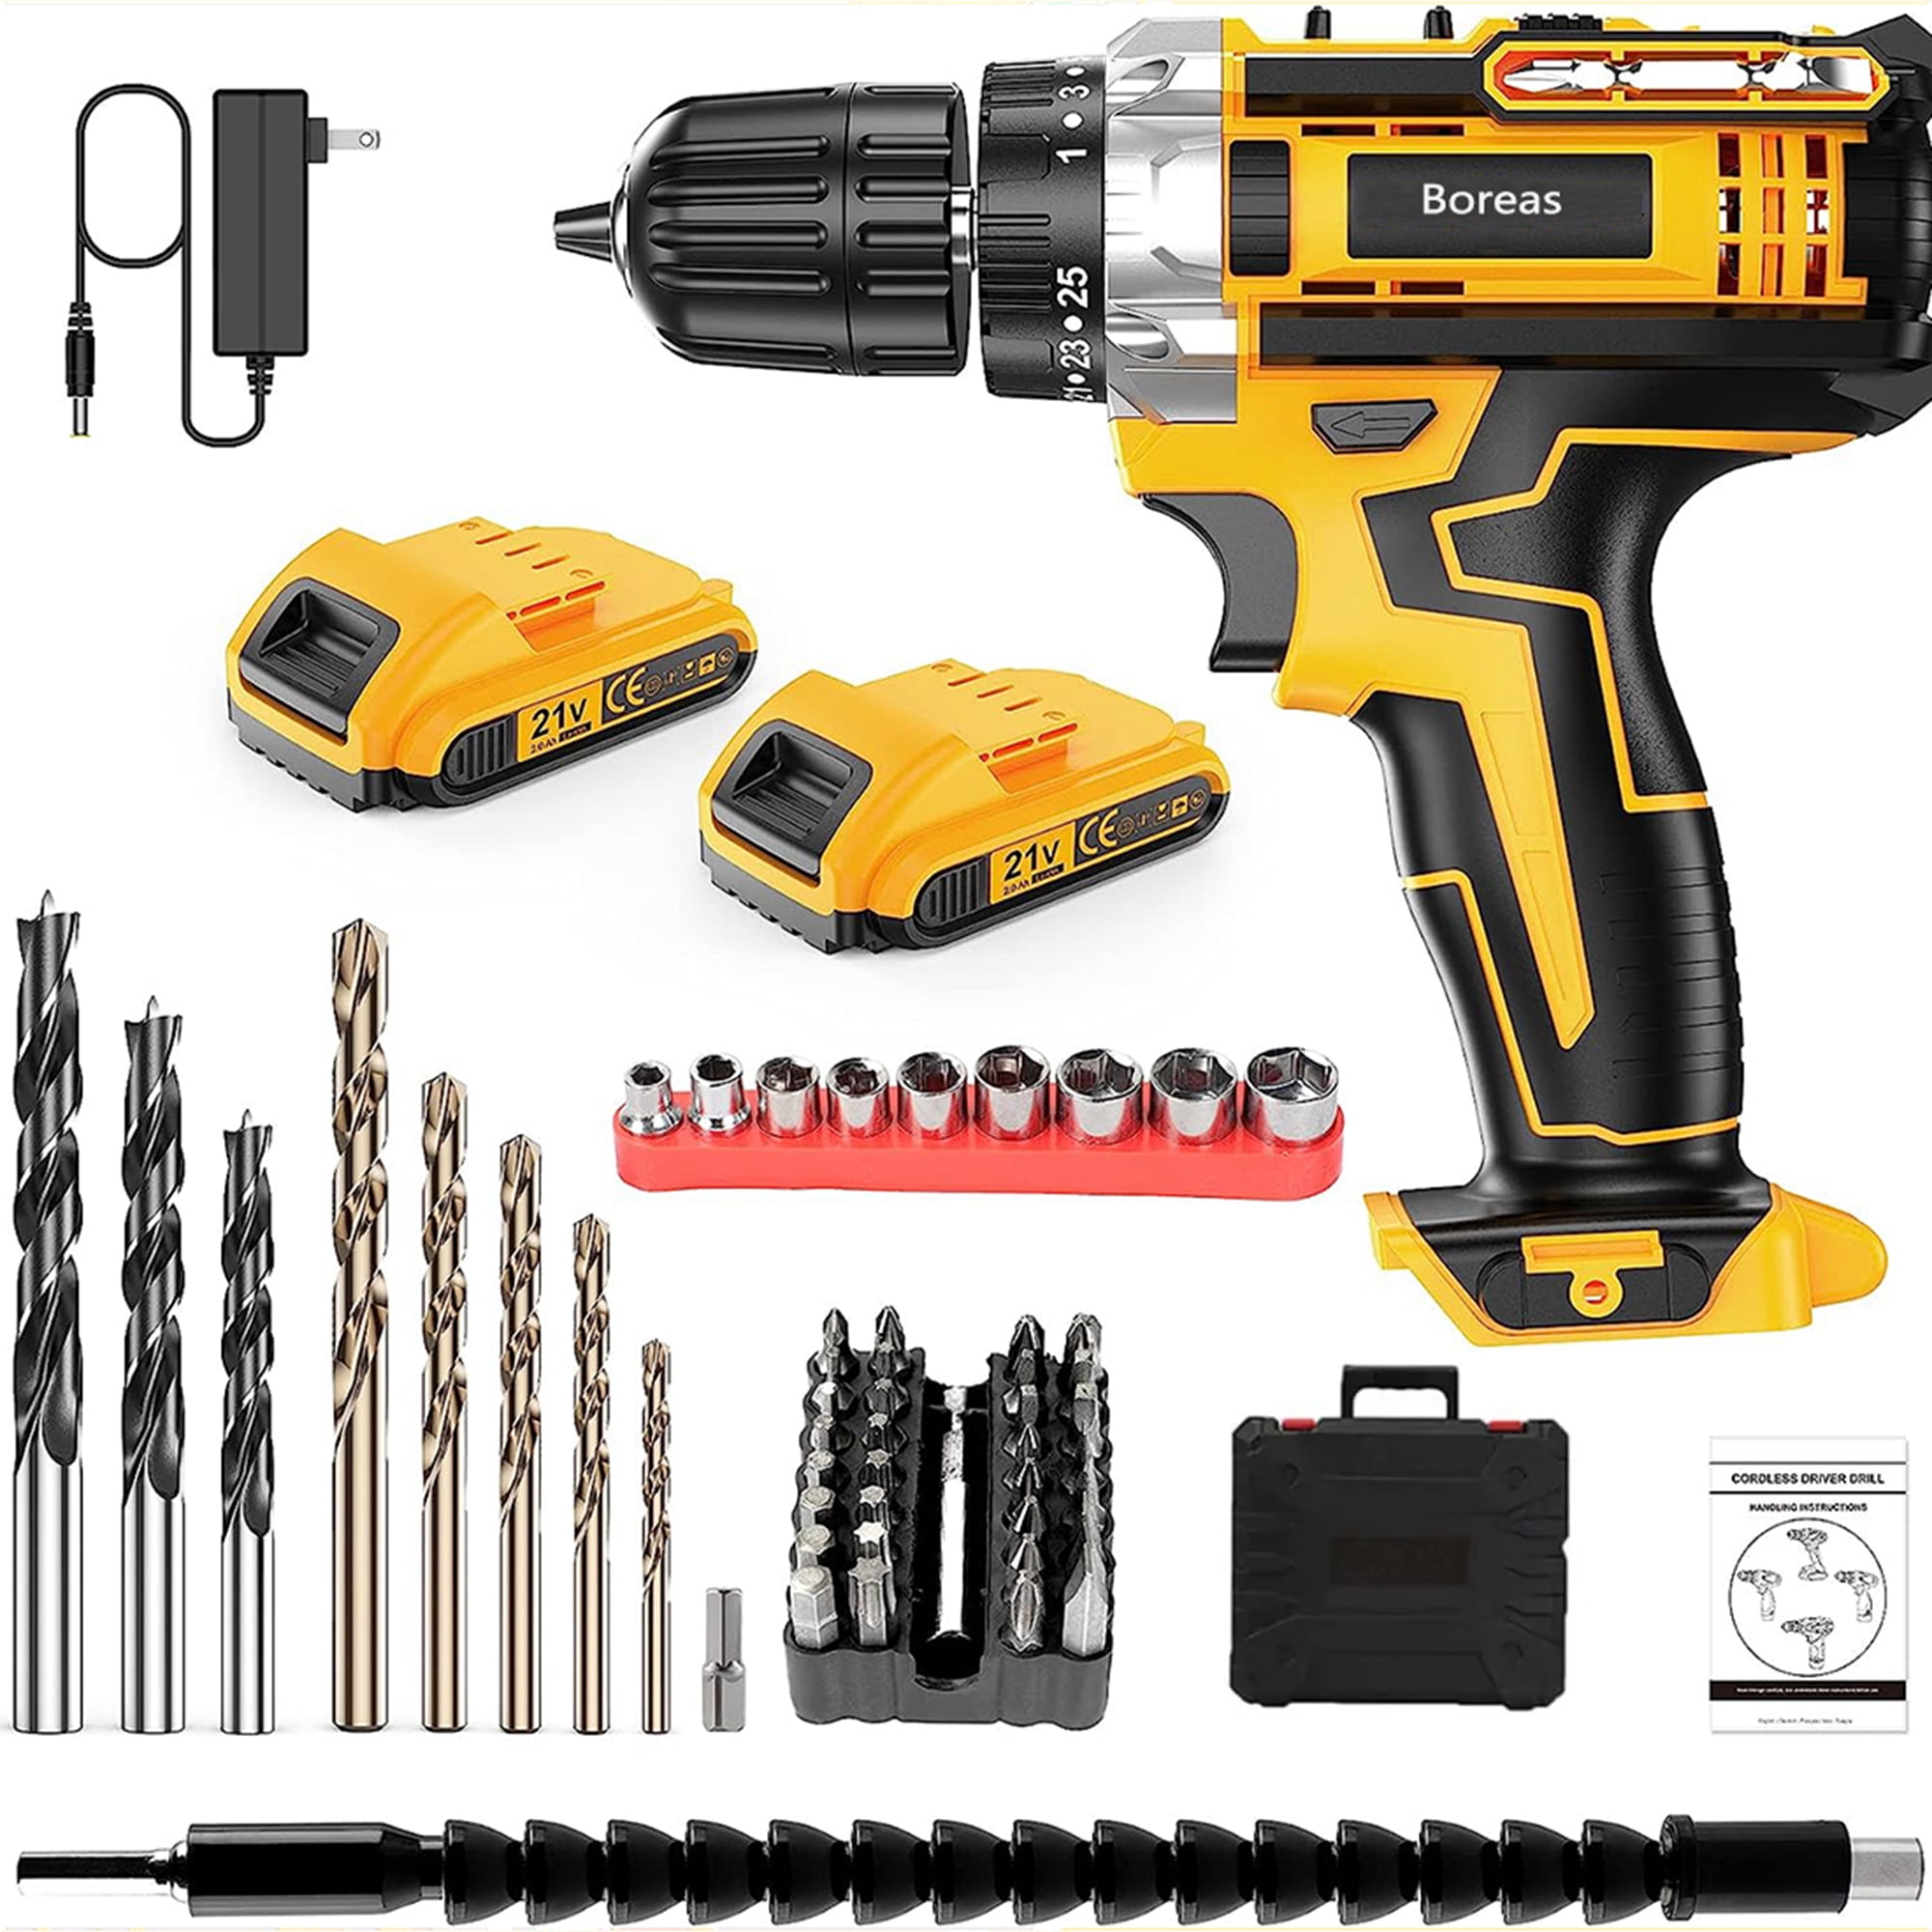 21V Cordless Drill Set, Power Cordless Drill Set, 3/8 inches Keyless Chuck  Power Tool Set with Power Drill Driver, 25+1 Torque Setting, Work Light